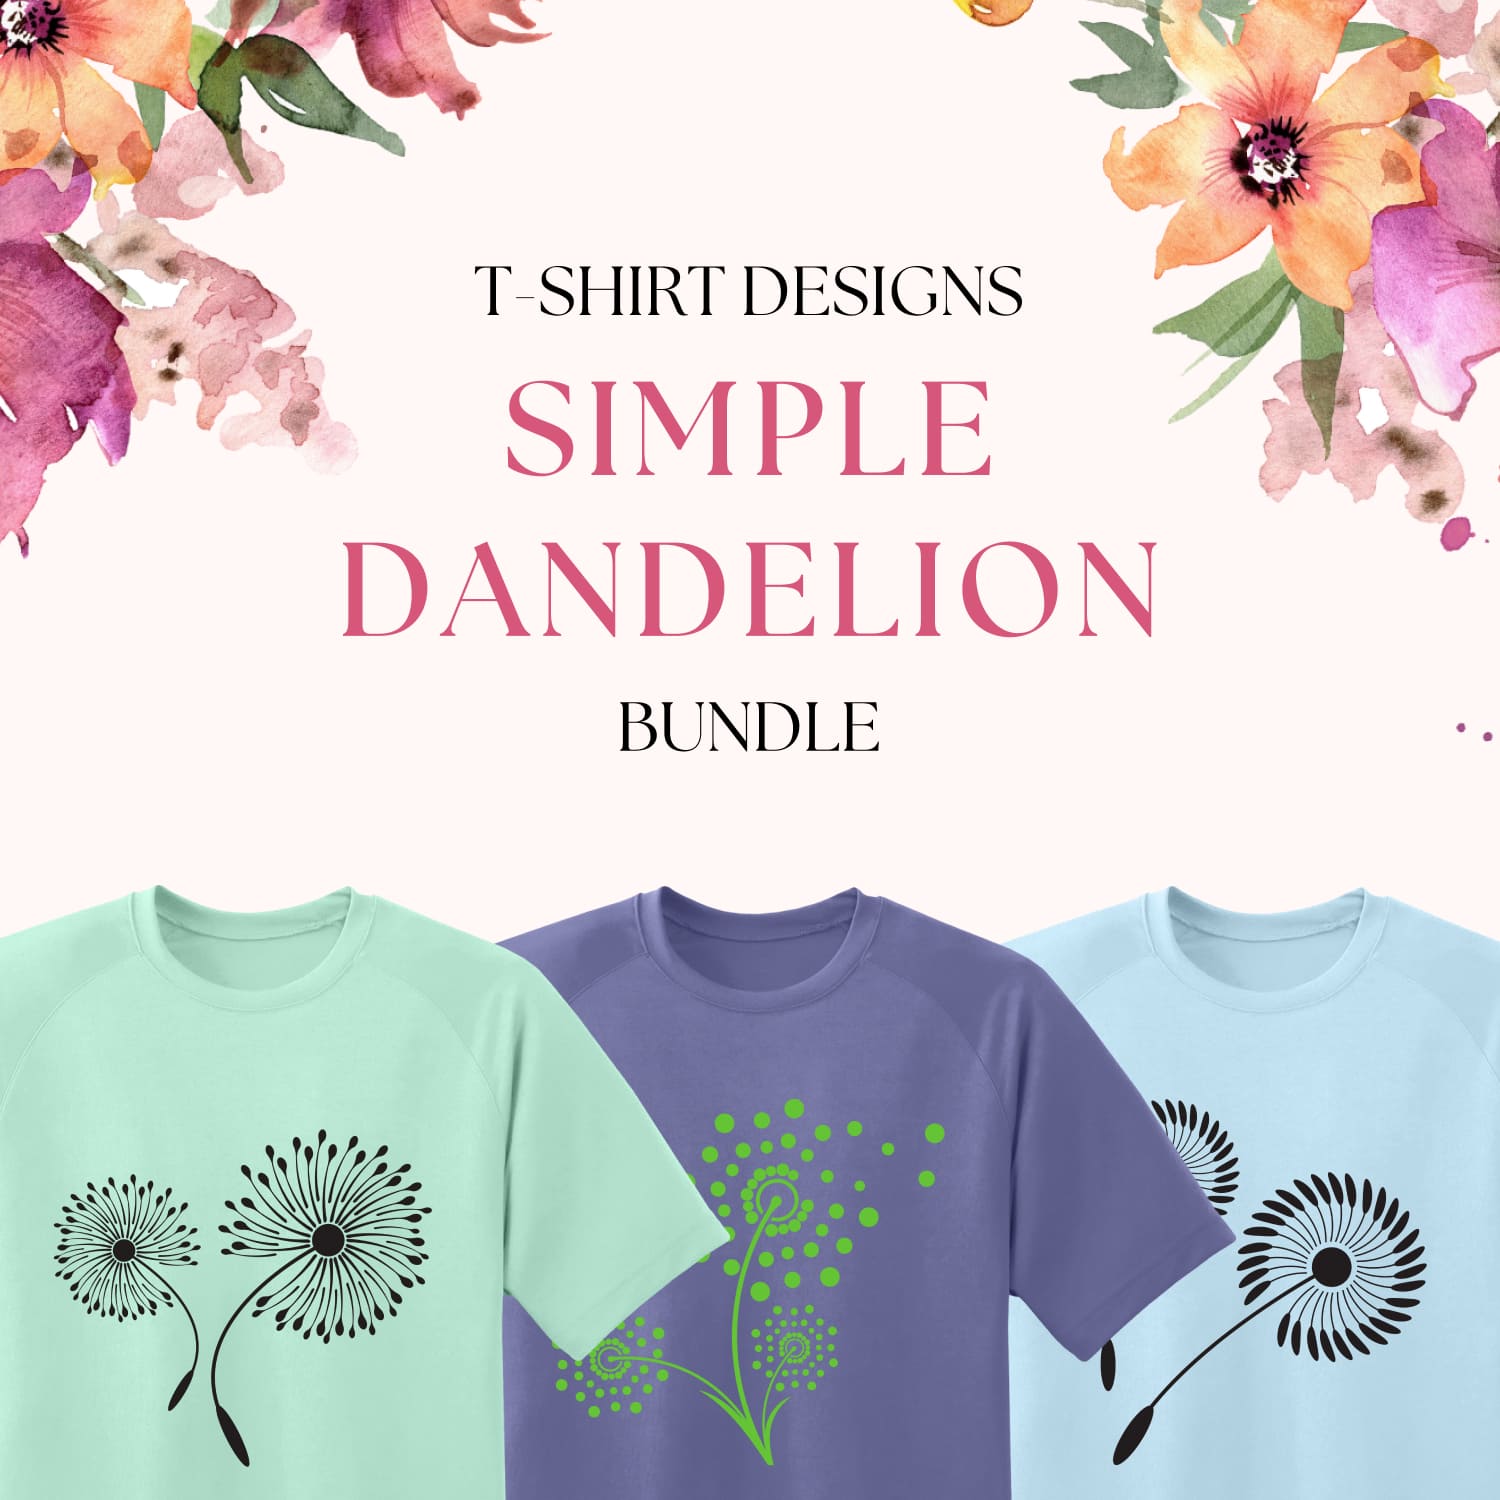 Pack of t-shirt images with adorable dandelion prints.